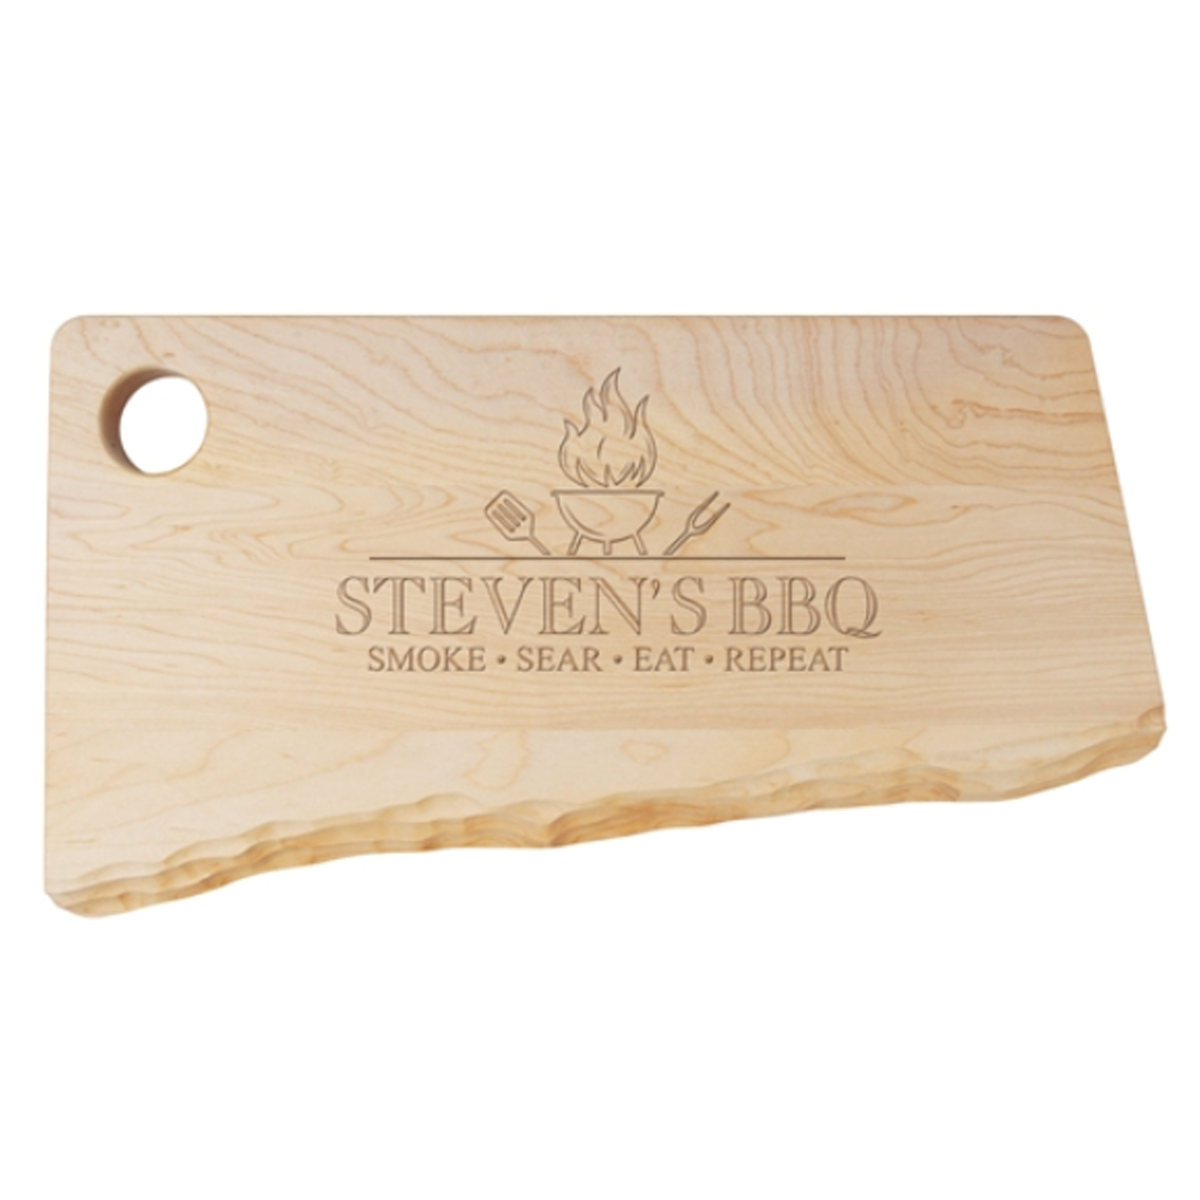 Maple Cutting Board ZMCB0009 - Southern Grace Creations